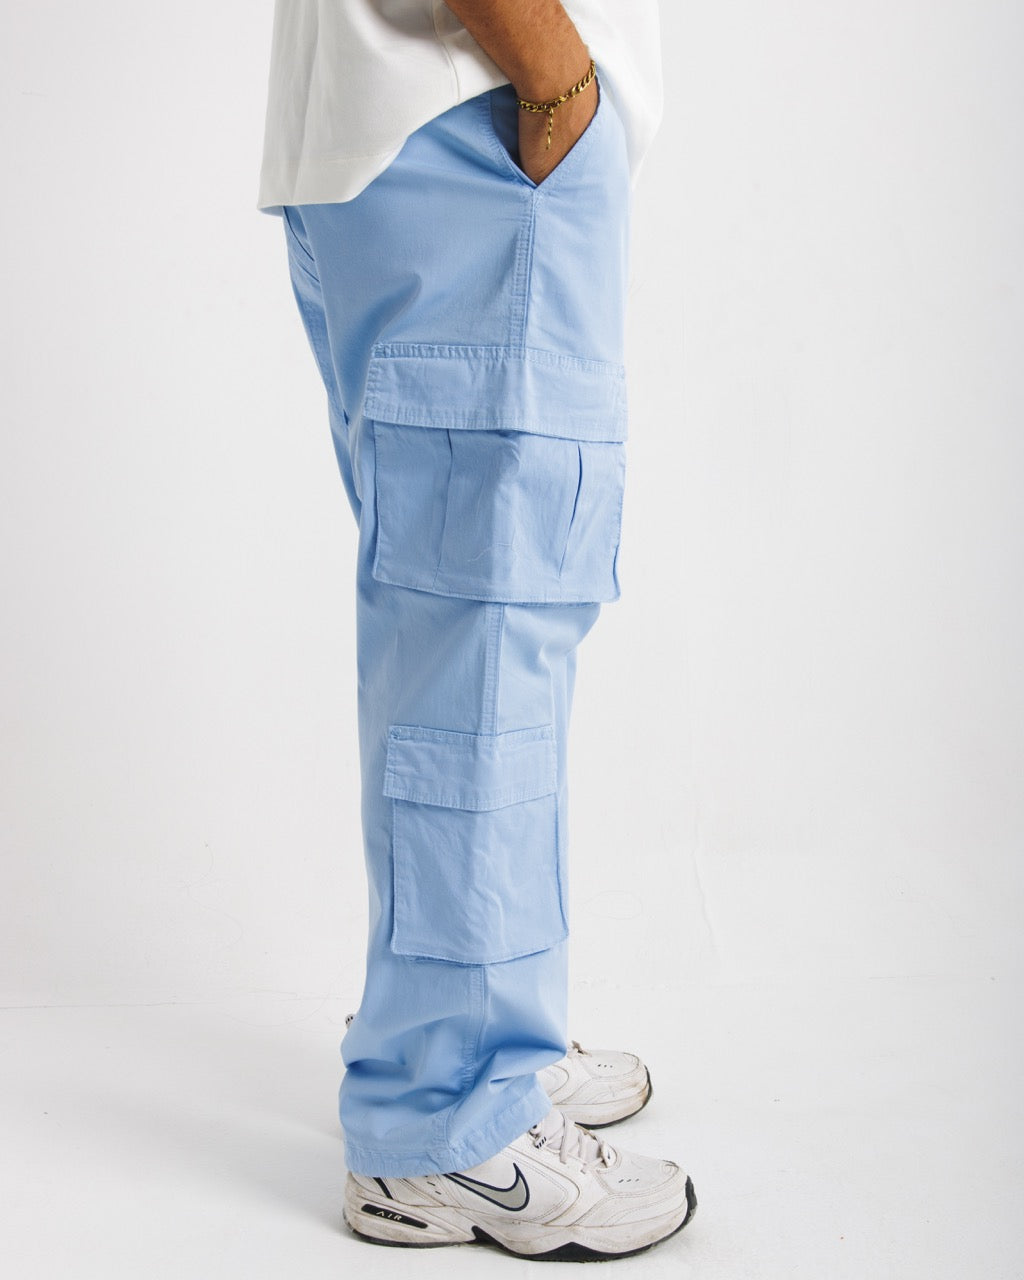 011 Cargo Pants Baby Blue *LIMITED EDITION* – Navy